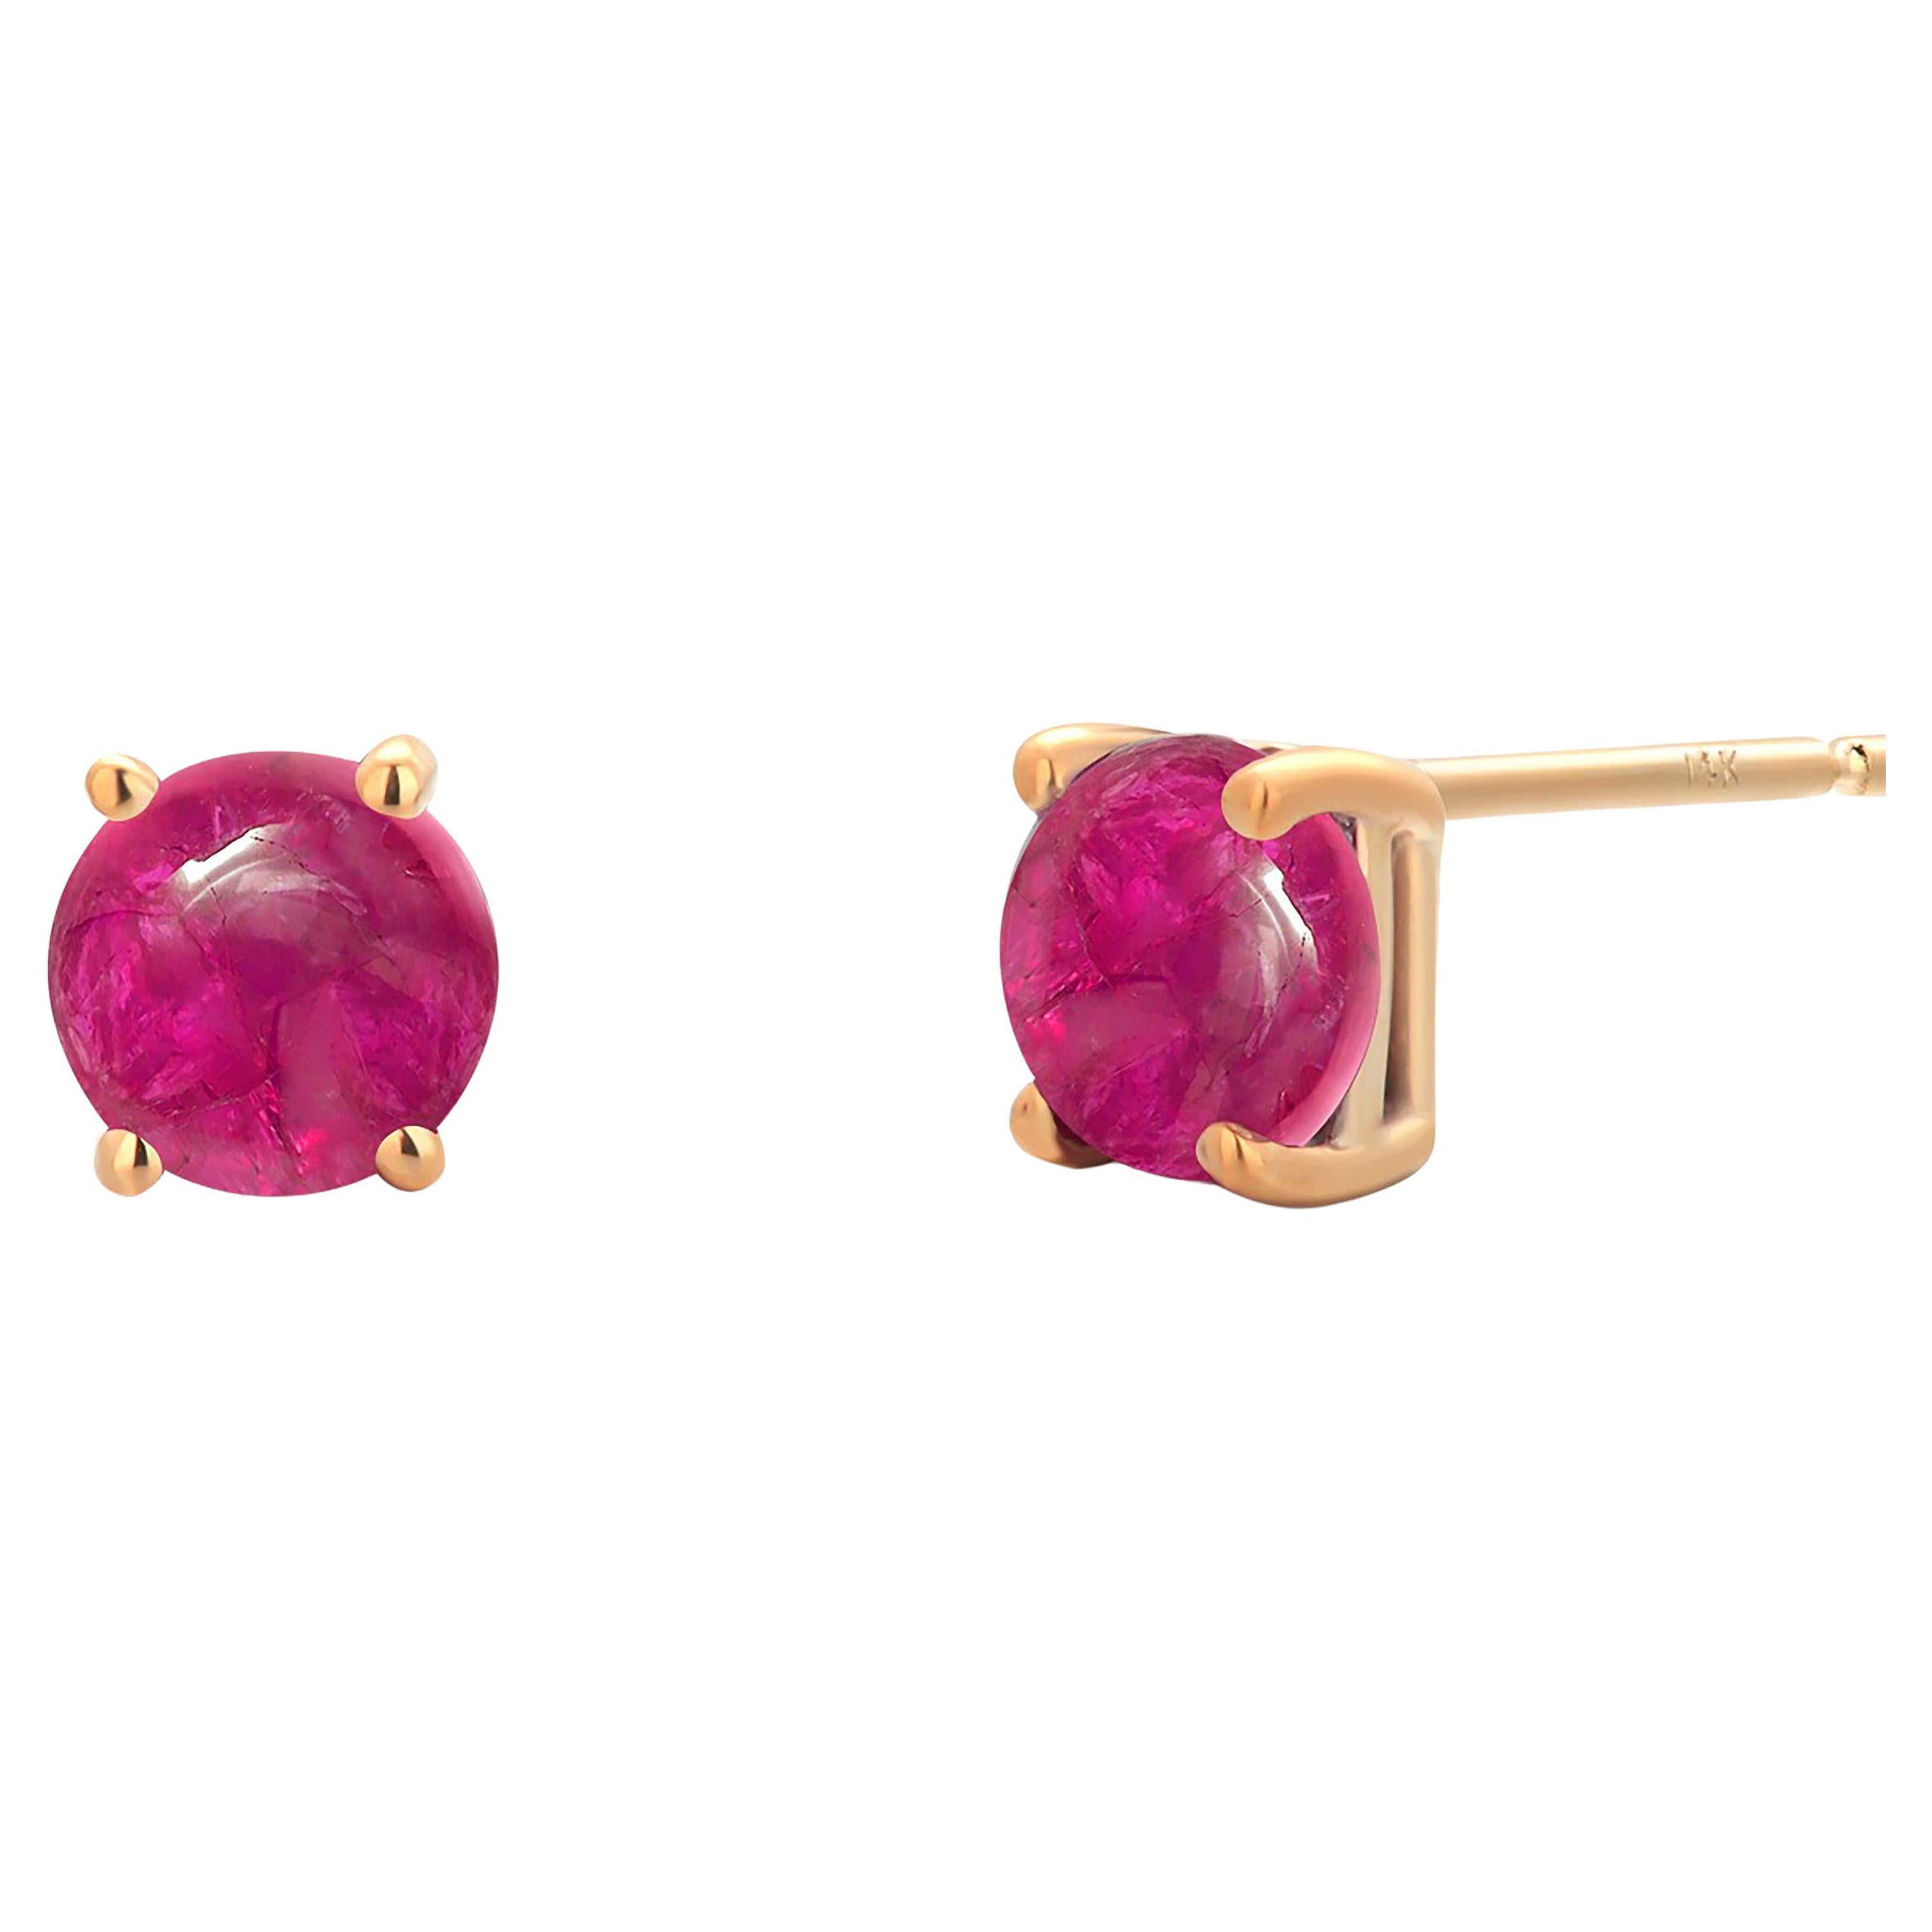 Two Matched Cabochon Rubies Weighing 1.65 Carat 0.23 Inch Yellow Gold Earrings For Sale